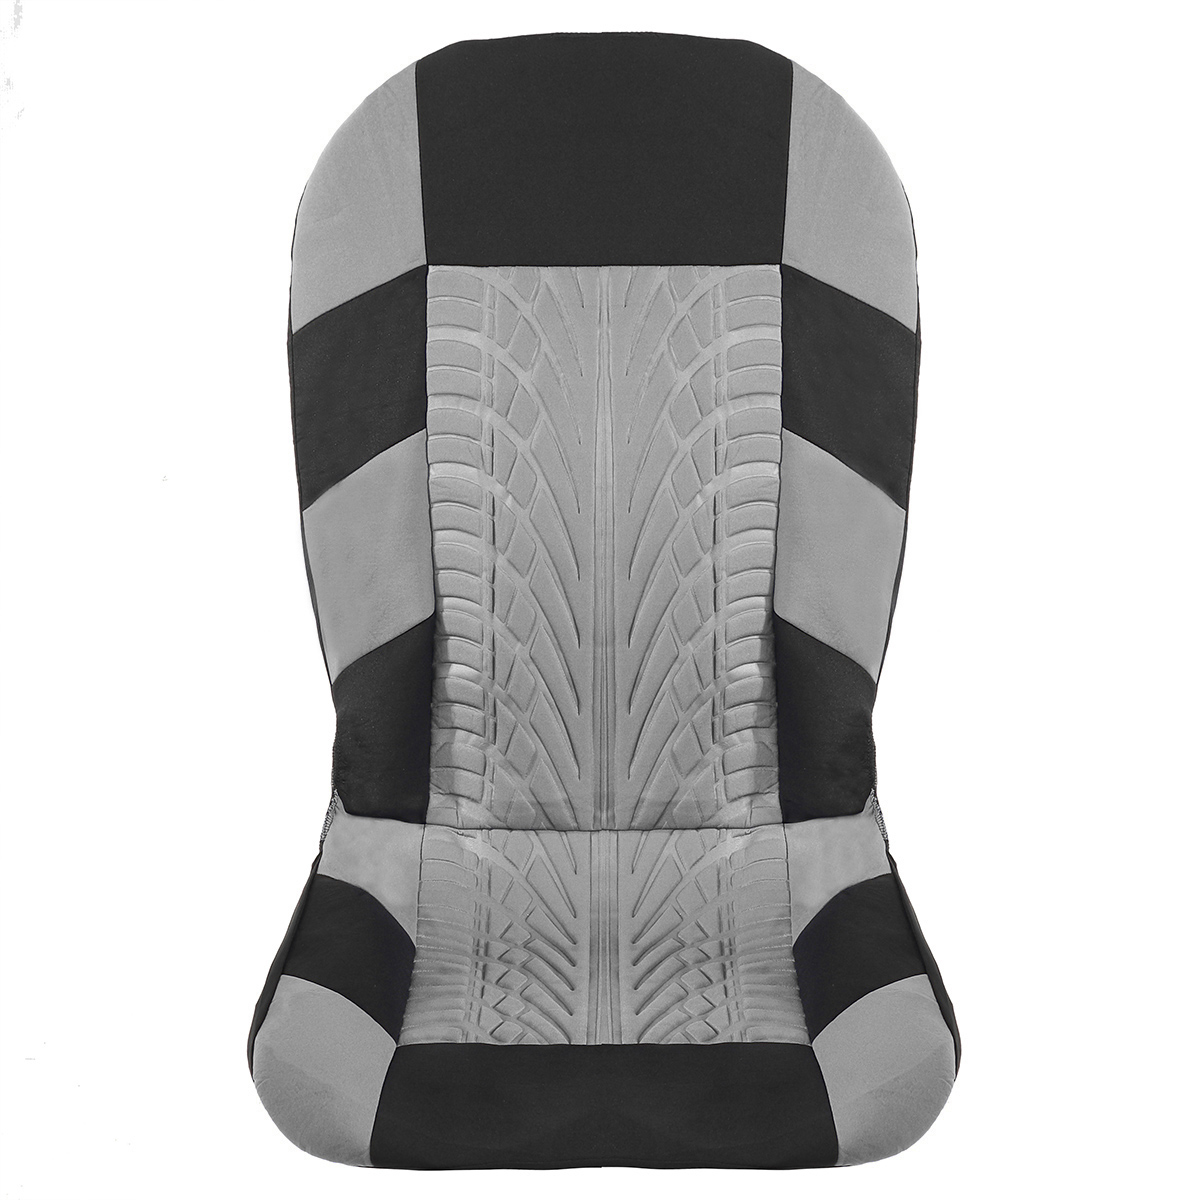 New 9PCS Universal Seat Covers for Car Full Car Seat Cover Car Cushion Case Cover Front Car Seat Cover Car Accessories Car Seats - image 5 of 8